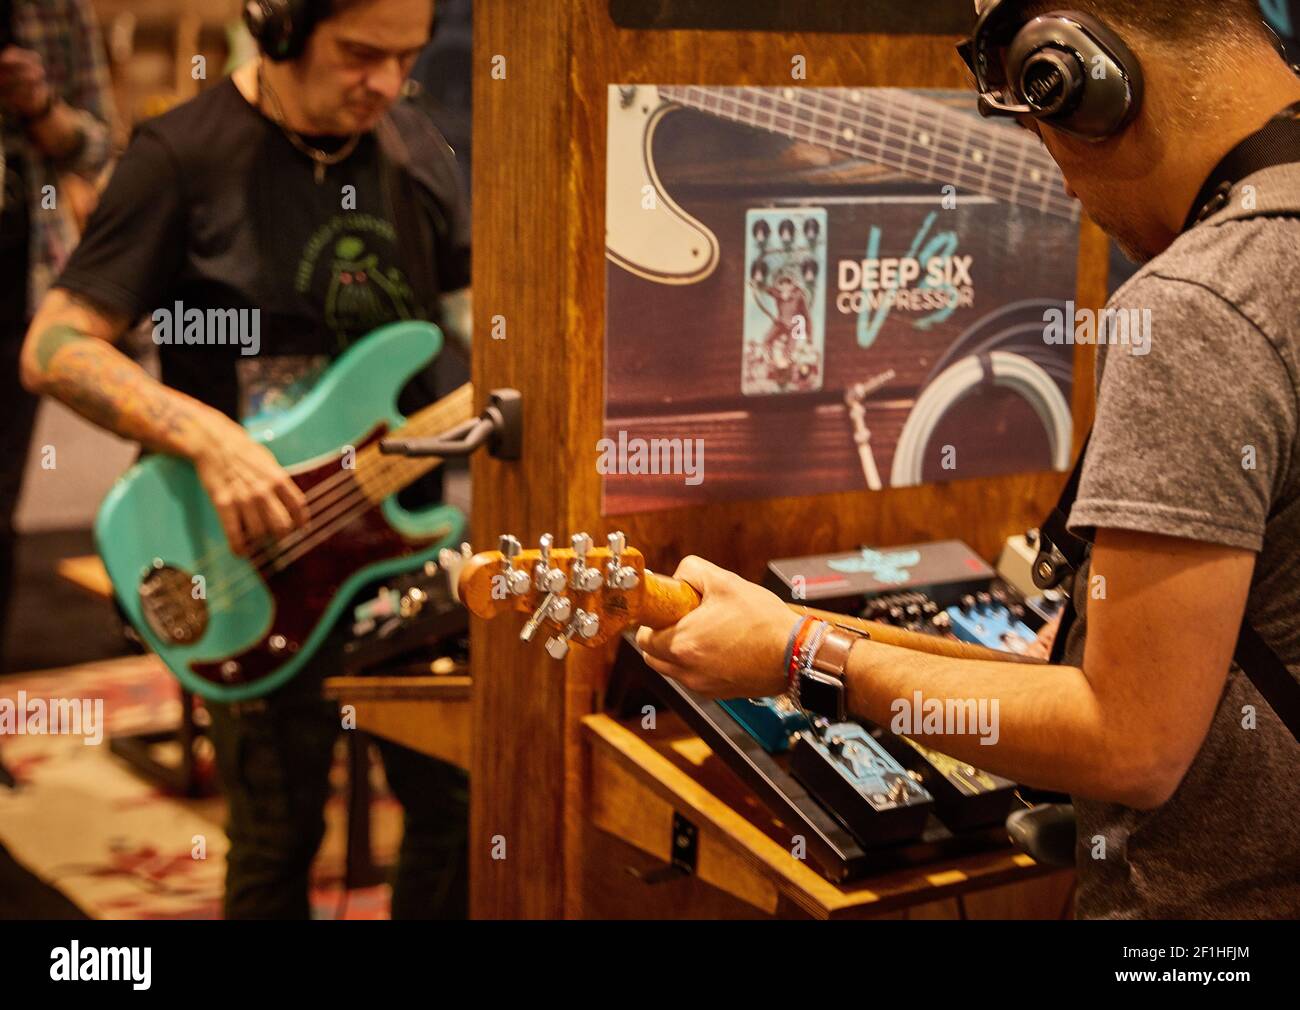 Attendees musicians testing playing guitar pedals at Musical Instrument Convention Stock Photo